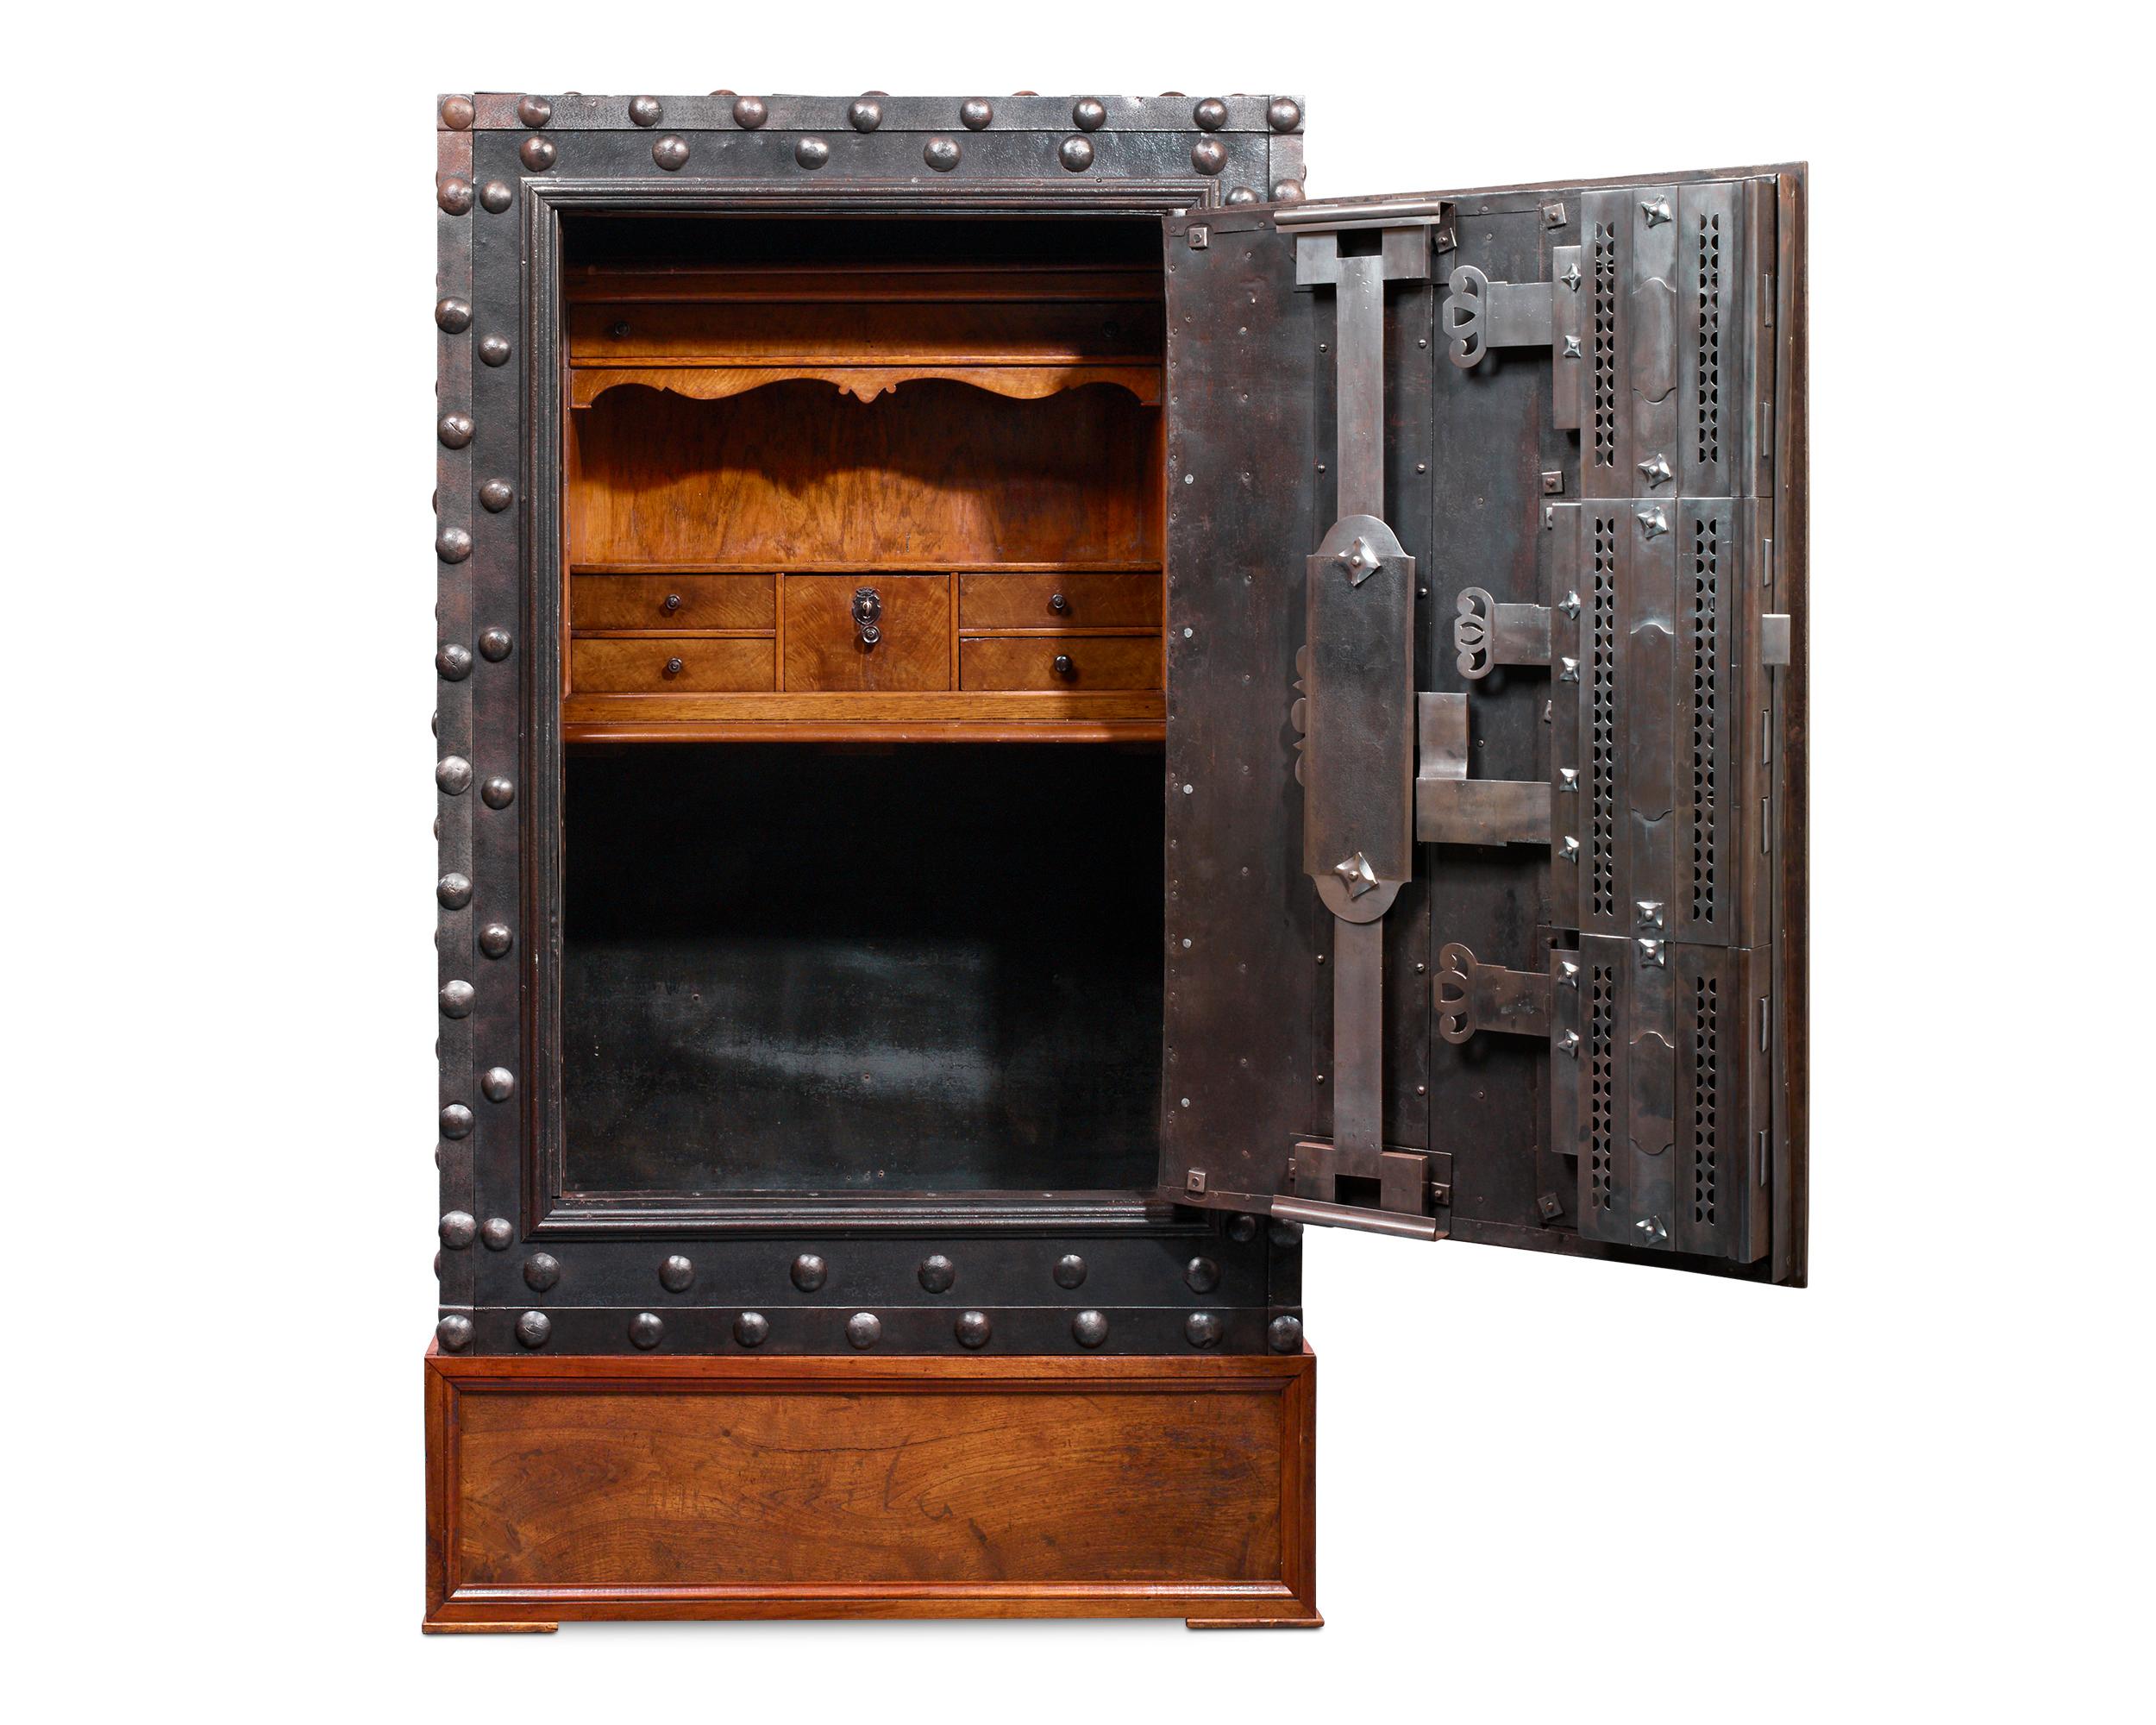 A pièce de résistance of mechanical complexity and exceptional craftsmanship, this fully functioning Italian hobnail safe dates to the turn of the 19th century and was one of the most secure means by which valuables could be stored. Weighing